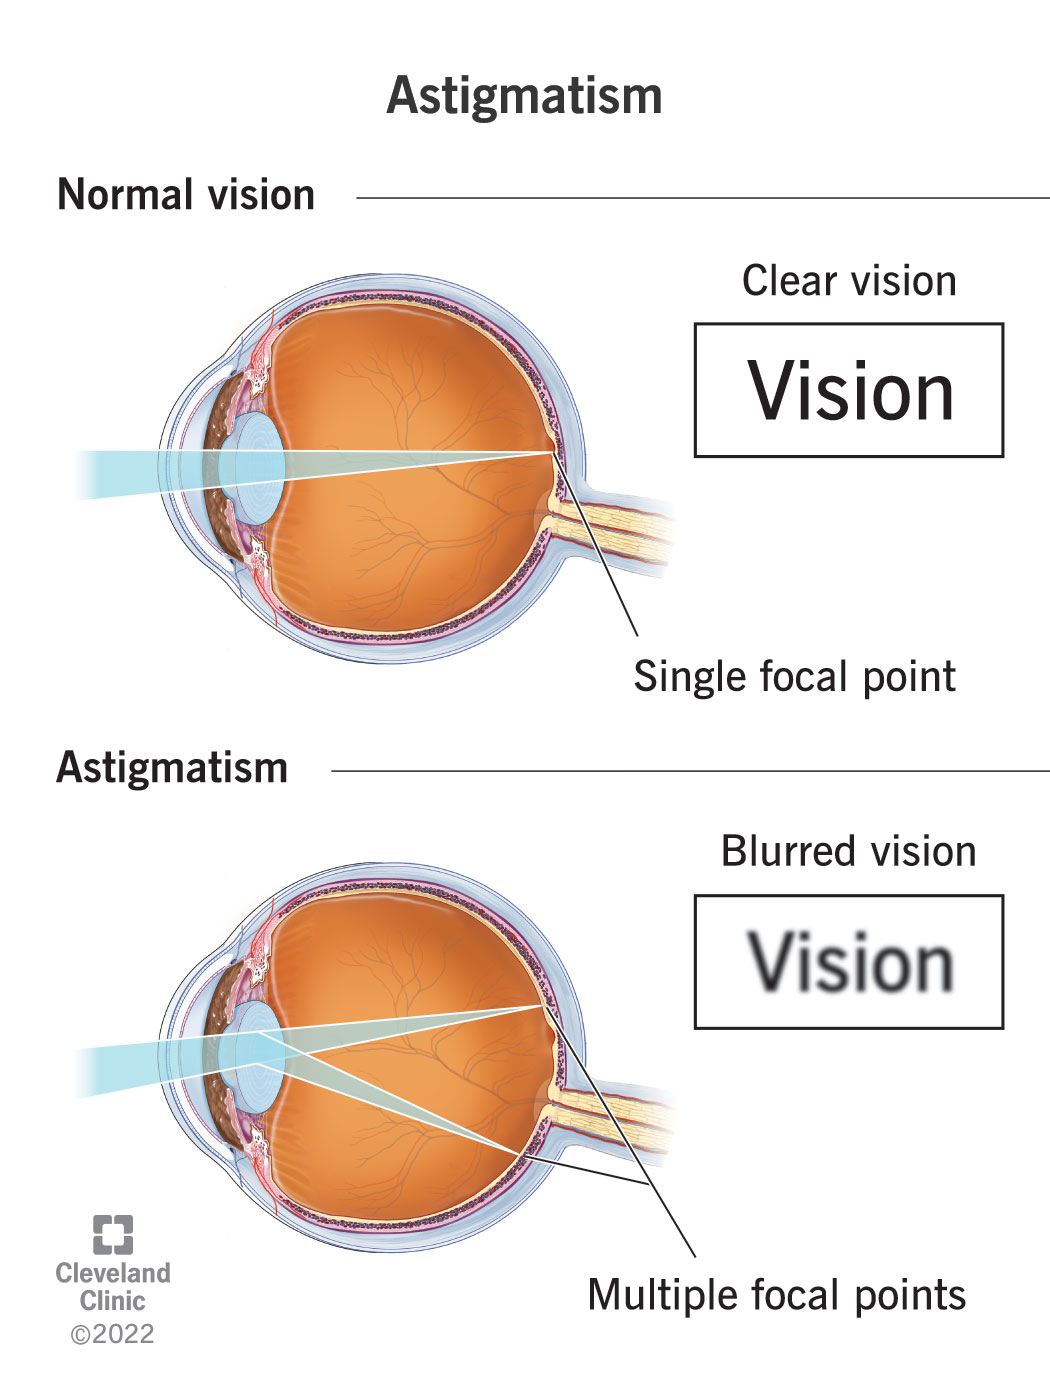 An illustration showing how astigmatism causes blurry vision